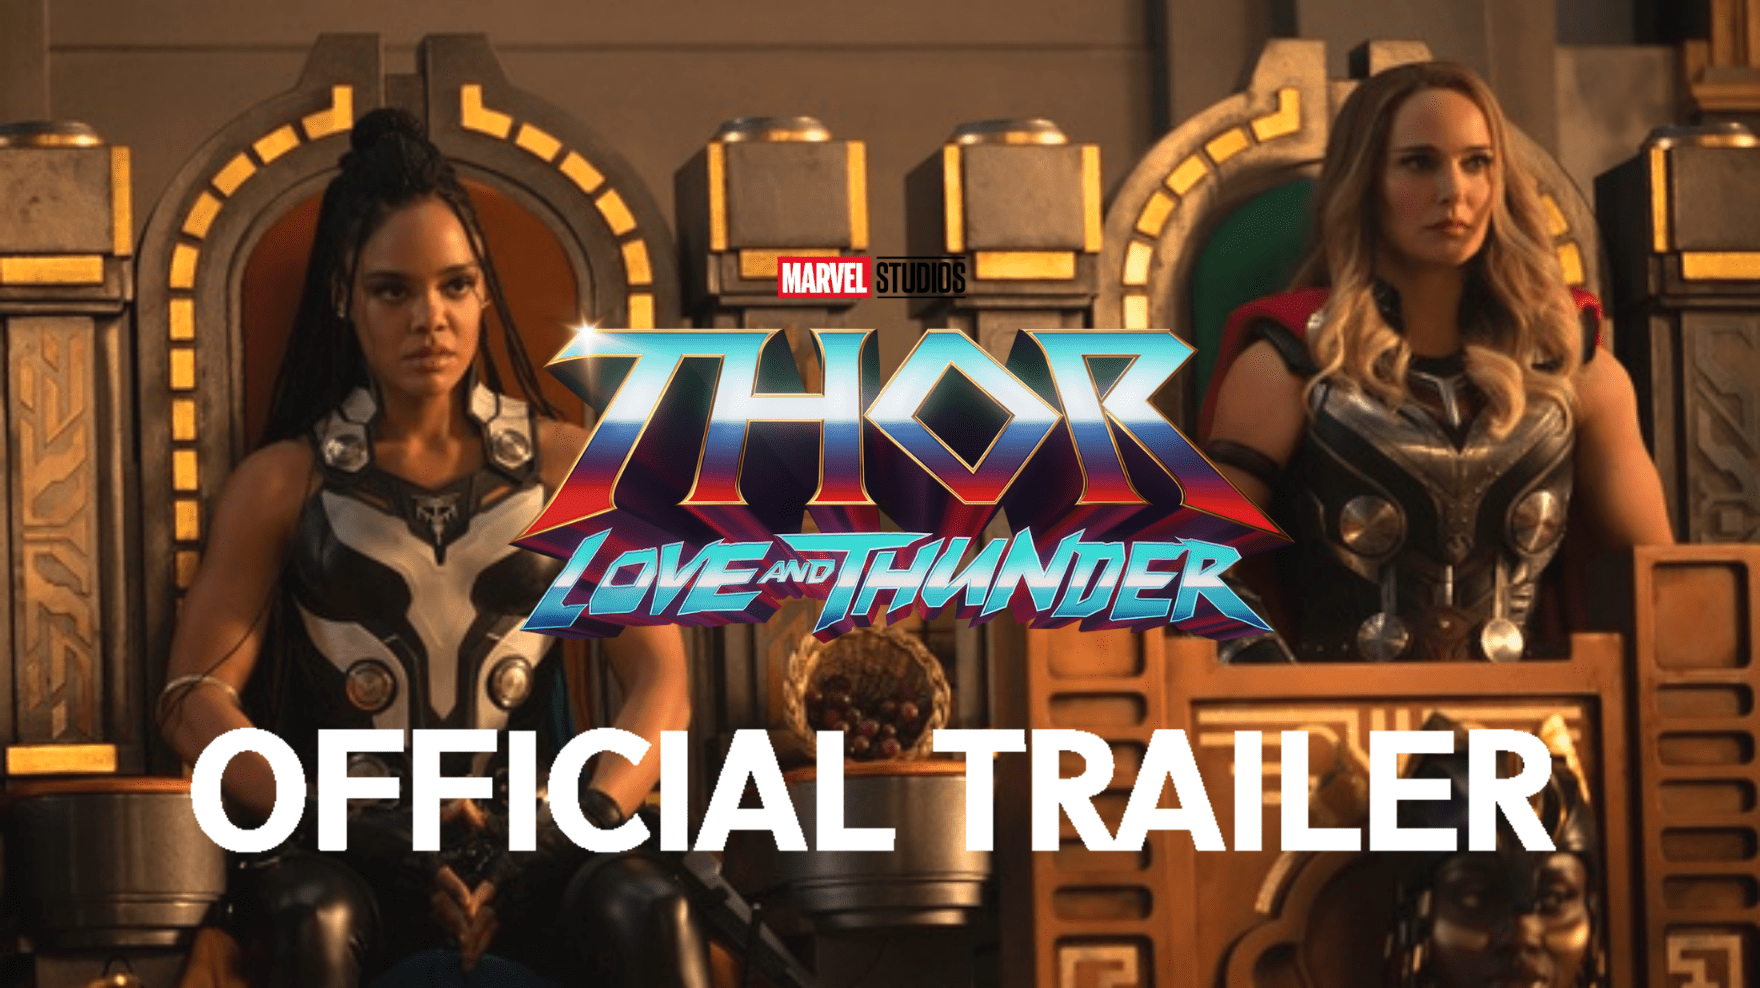 L-R): Tessa Thompson as Valkyrie and Natalie Portman as Mighty Thor in Marvel Studios' THOR: LOVE AND THUNDER